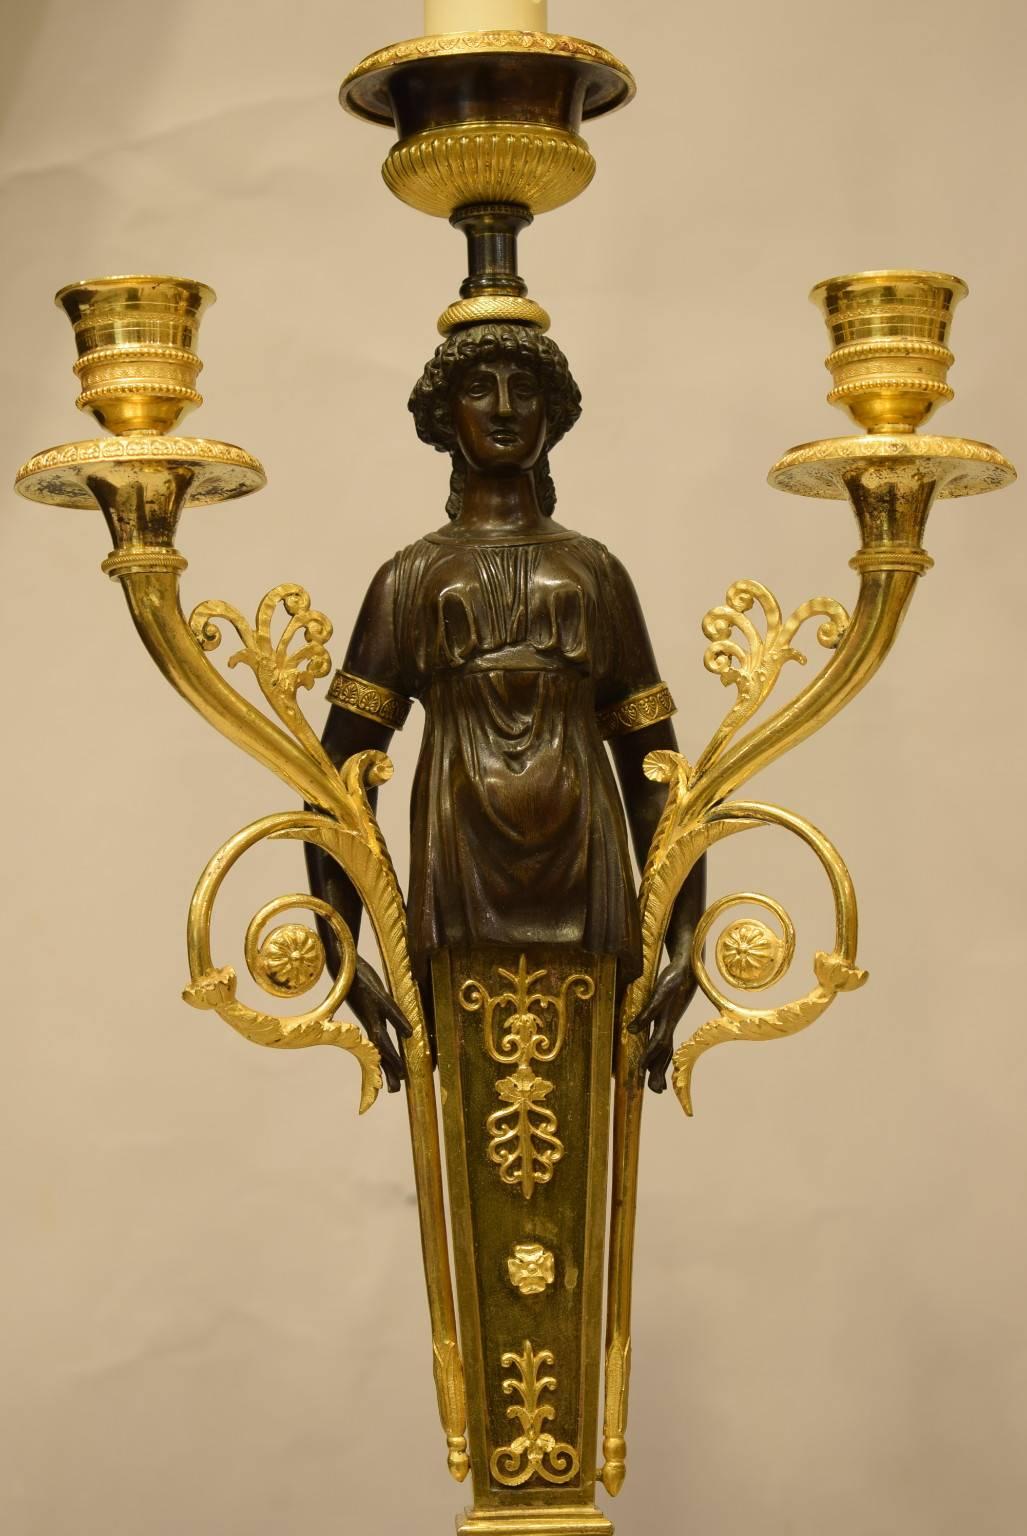 Magnificent pair of Empire candelabra, gilt and patinated bronze, now turned into electric lamps.